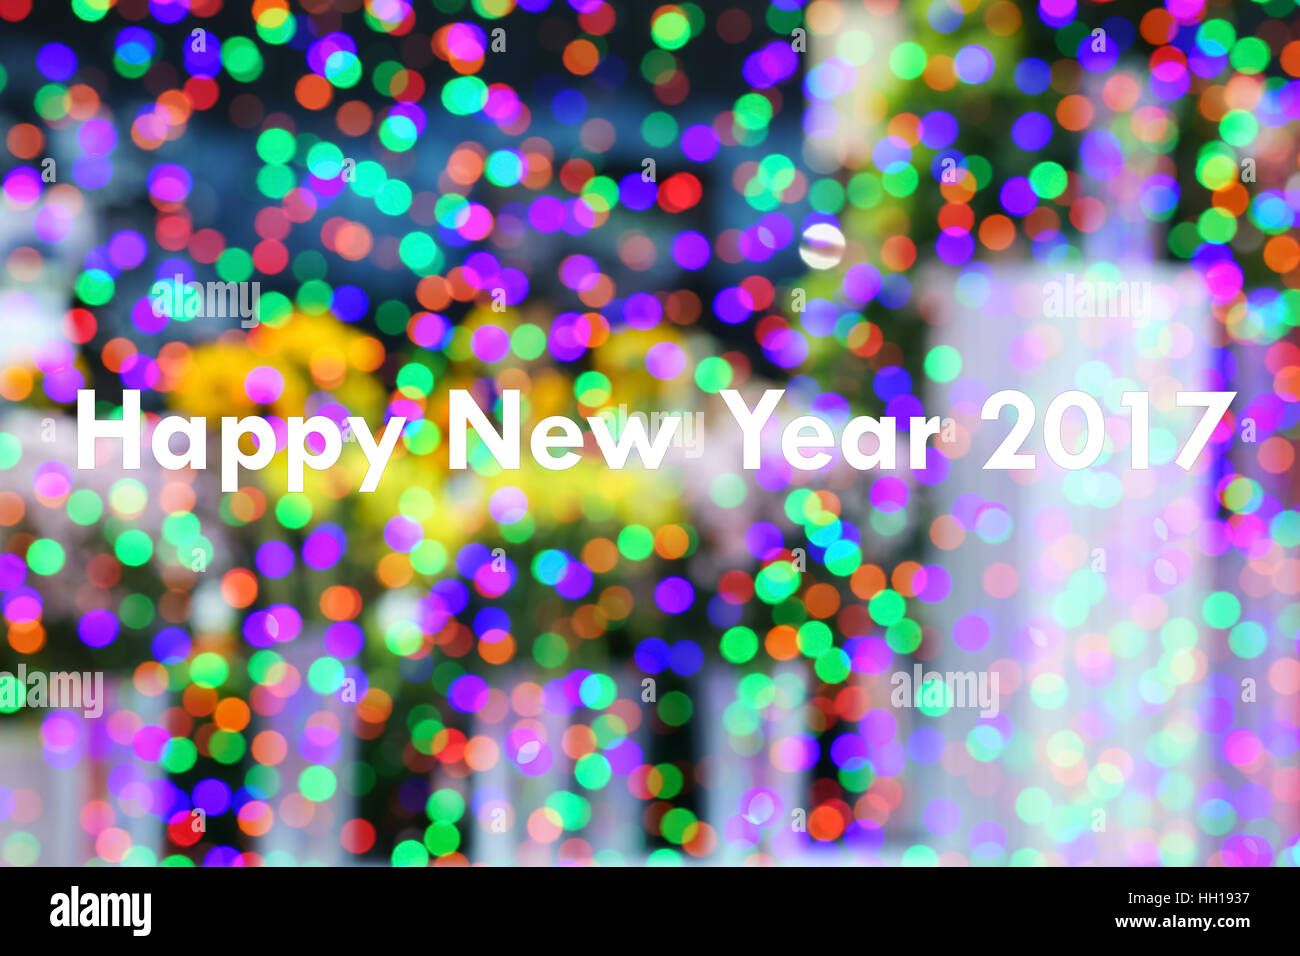 Free Vector | Happy new year background 2017 with colored confetti